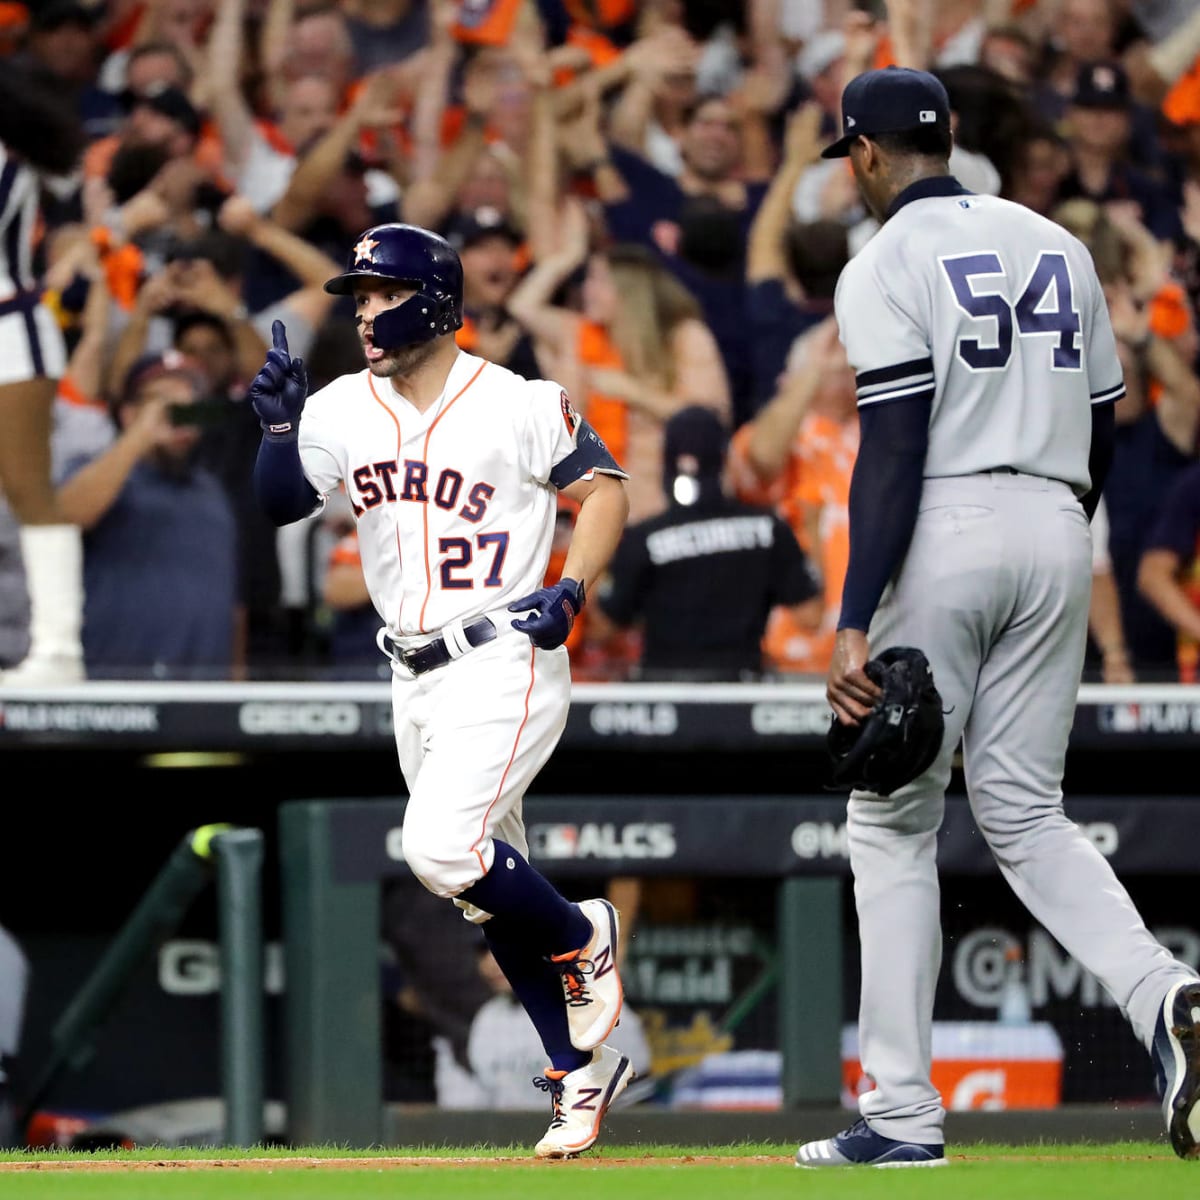 Jose Altuve interview, jersey coverup sparks electronic buzzer speculation